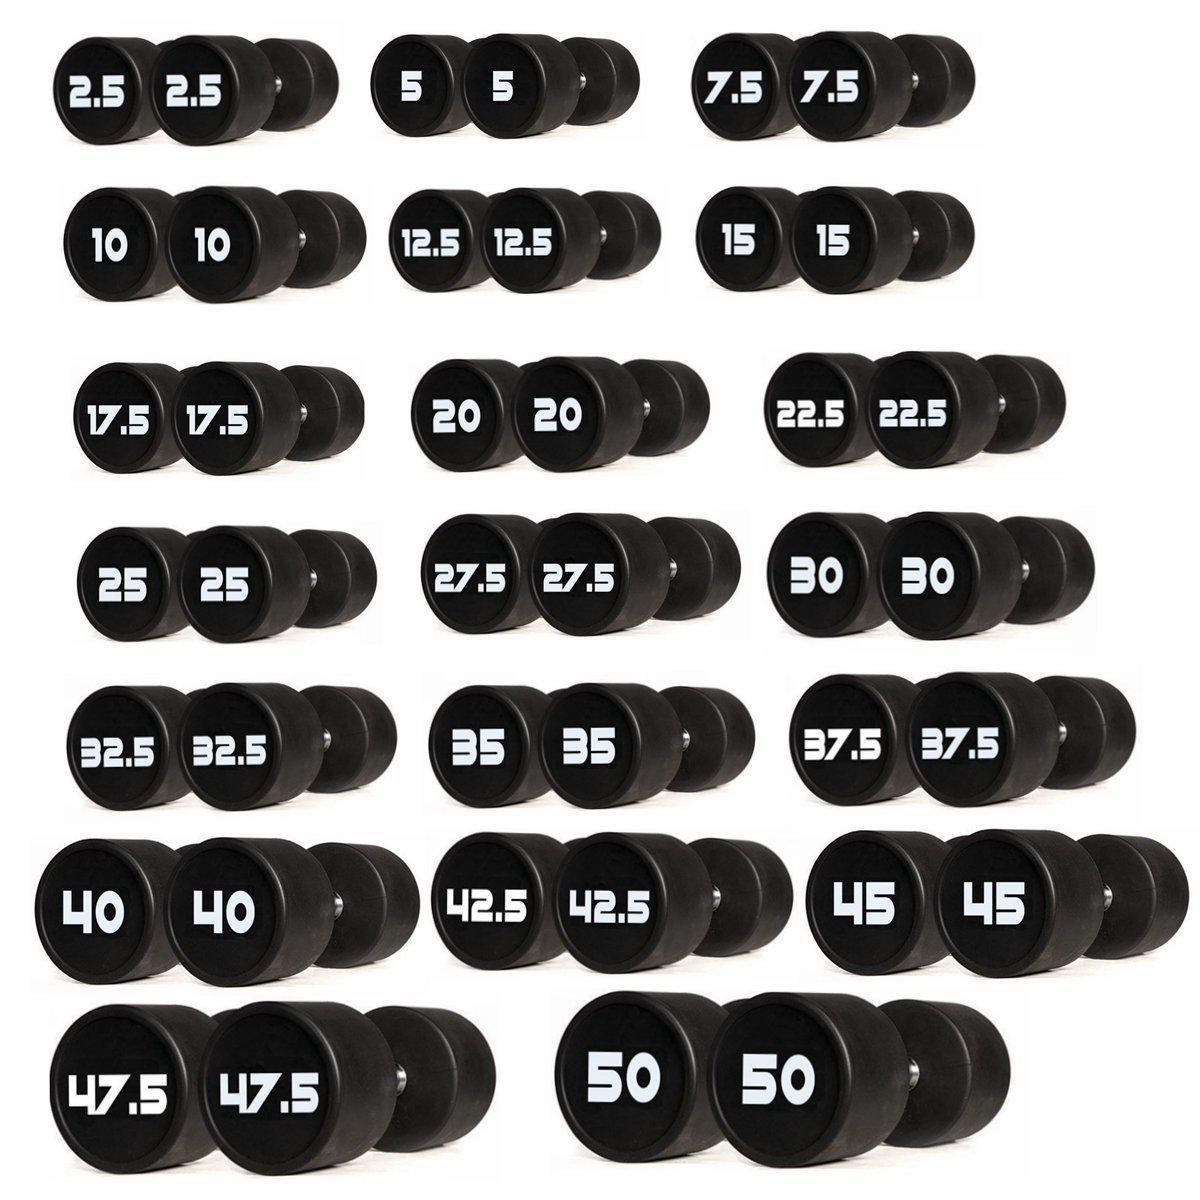 Prostyle Rubber Fixed Dumbbell Set  2.5kg to 50kg - 10 Pairs -Prostyle PU Dumbbell Package-Gym Direct